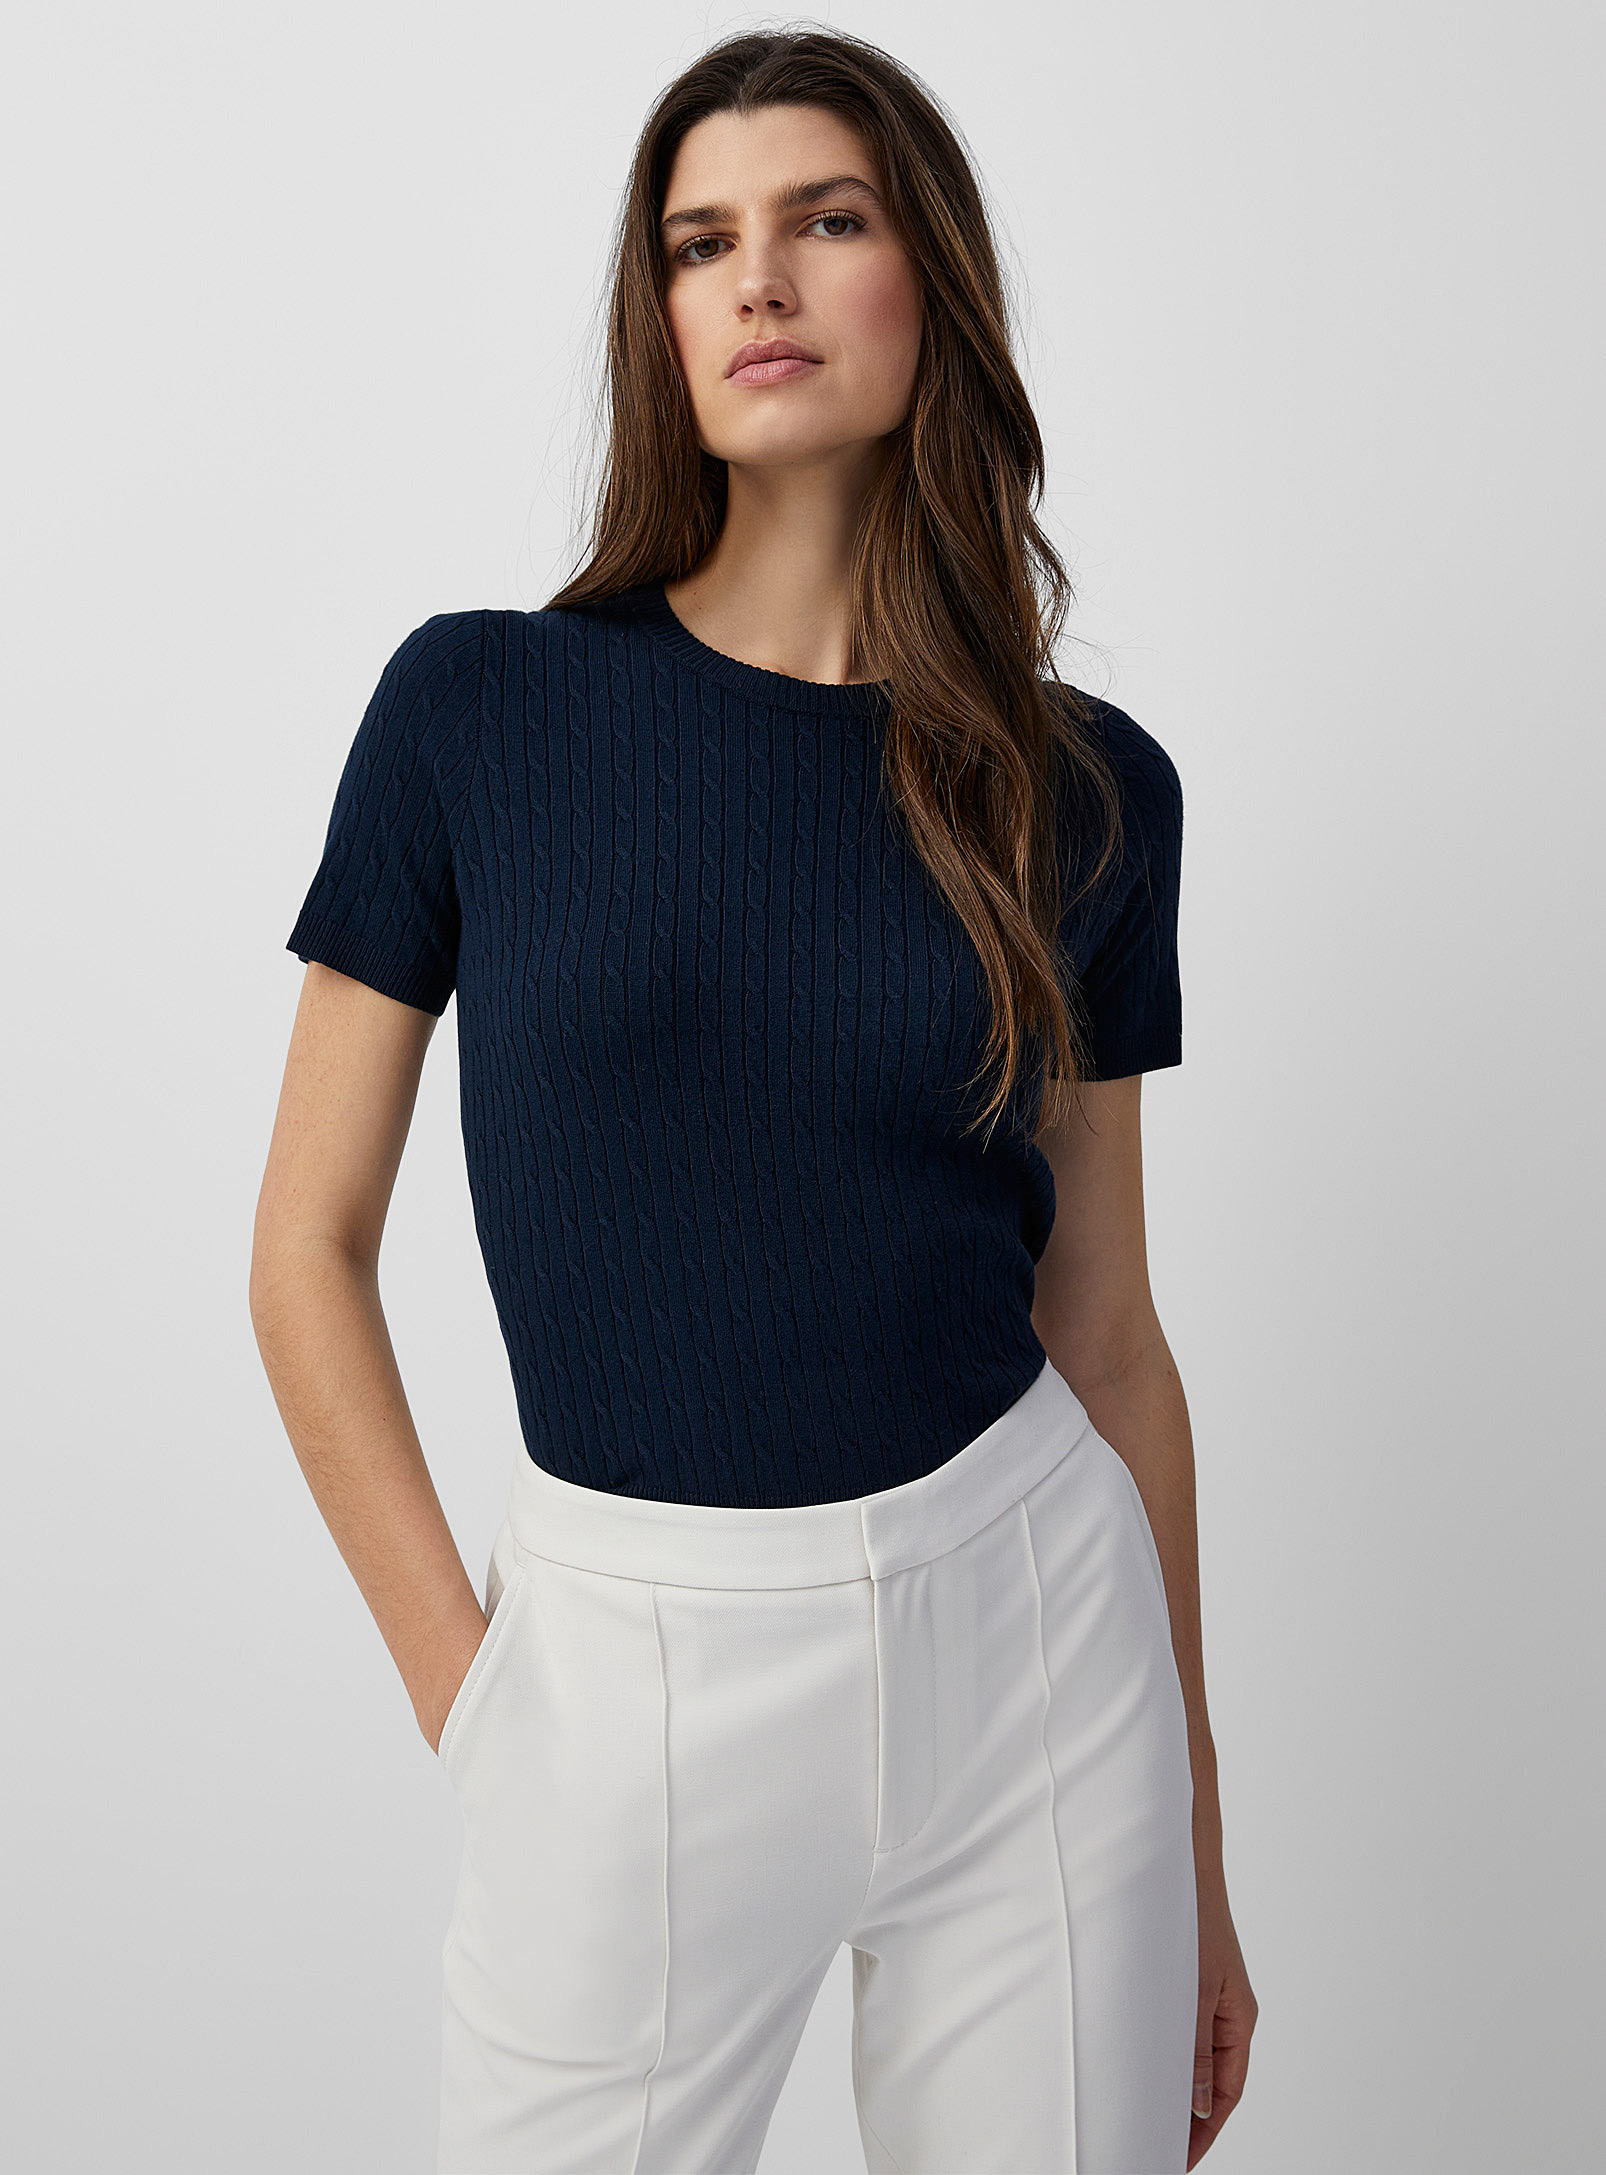 Contemporaine Twisted Cable Crew-neck Sweater In Marine Blue